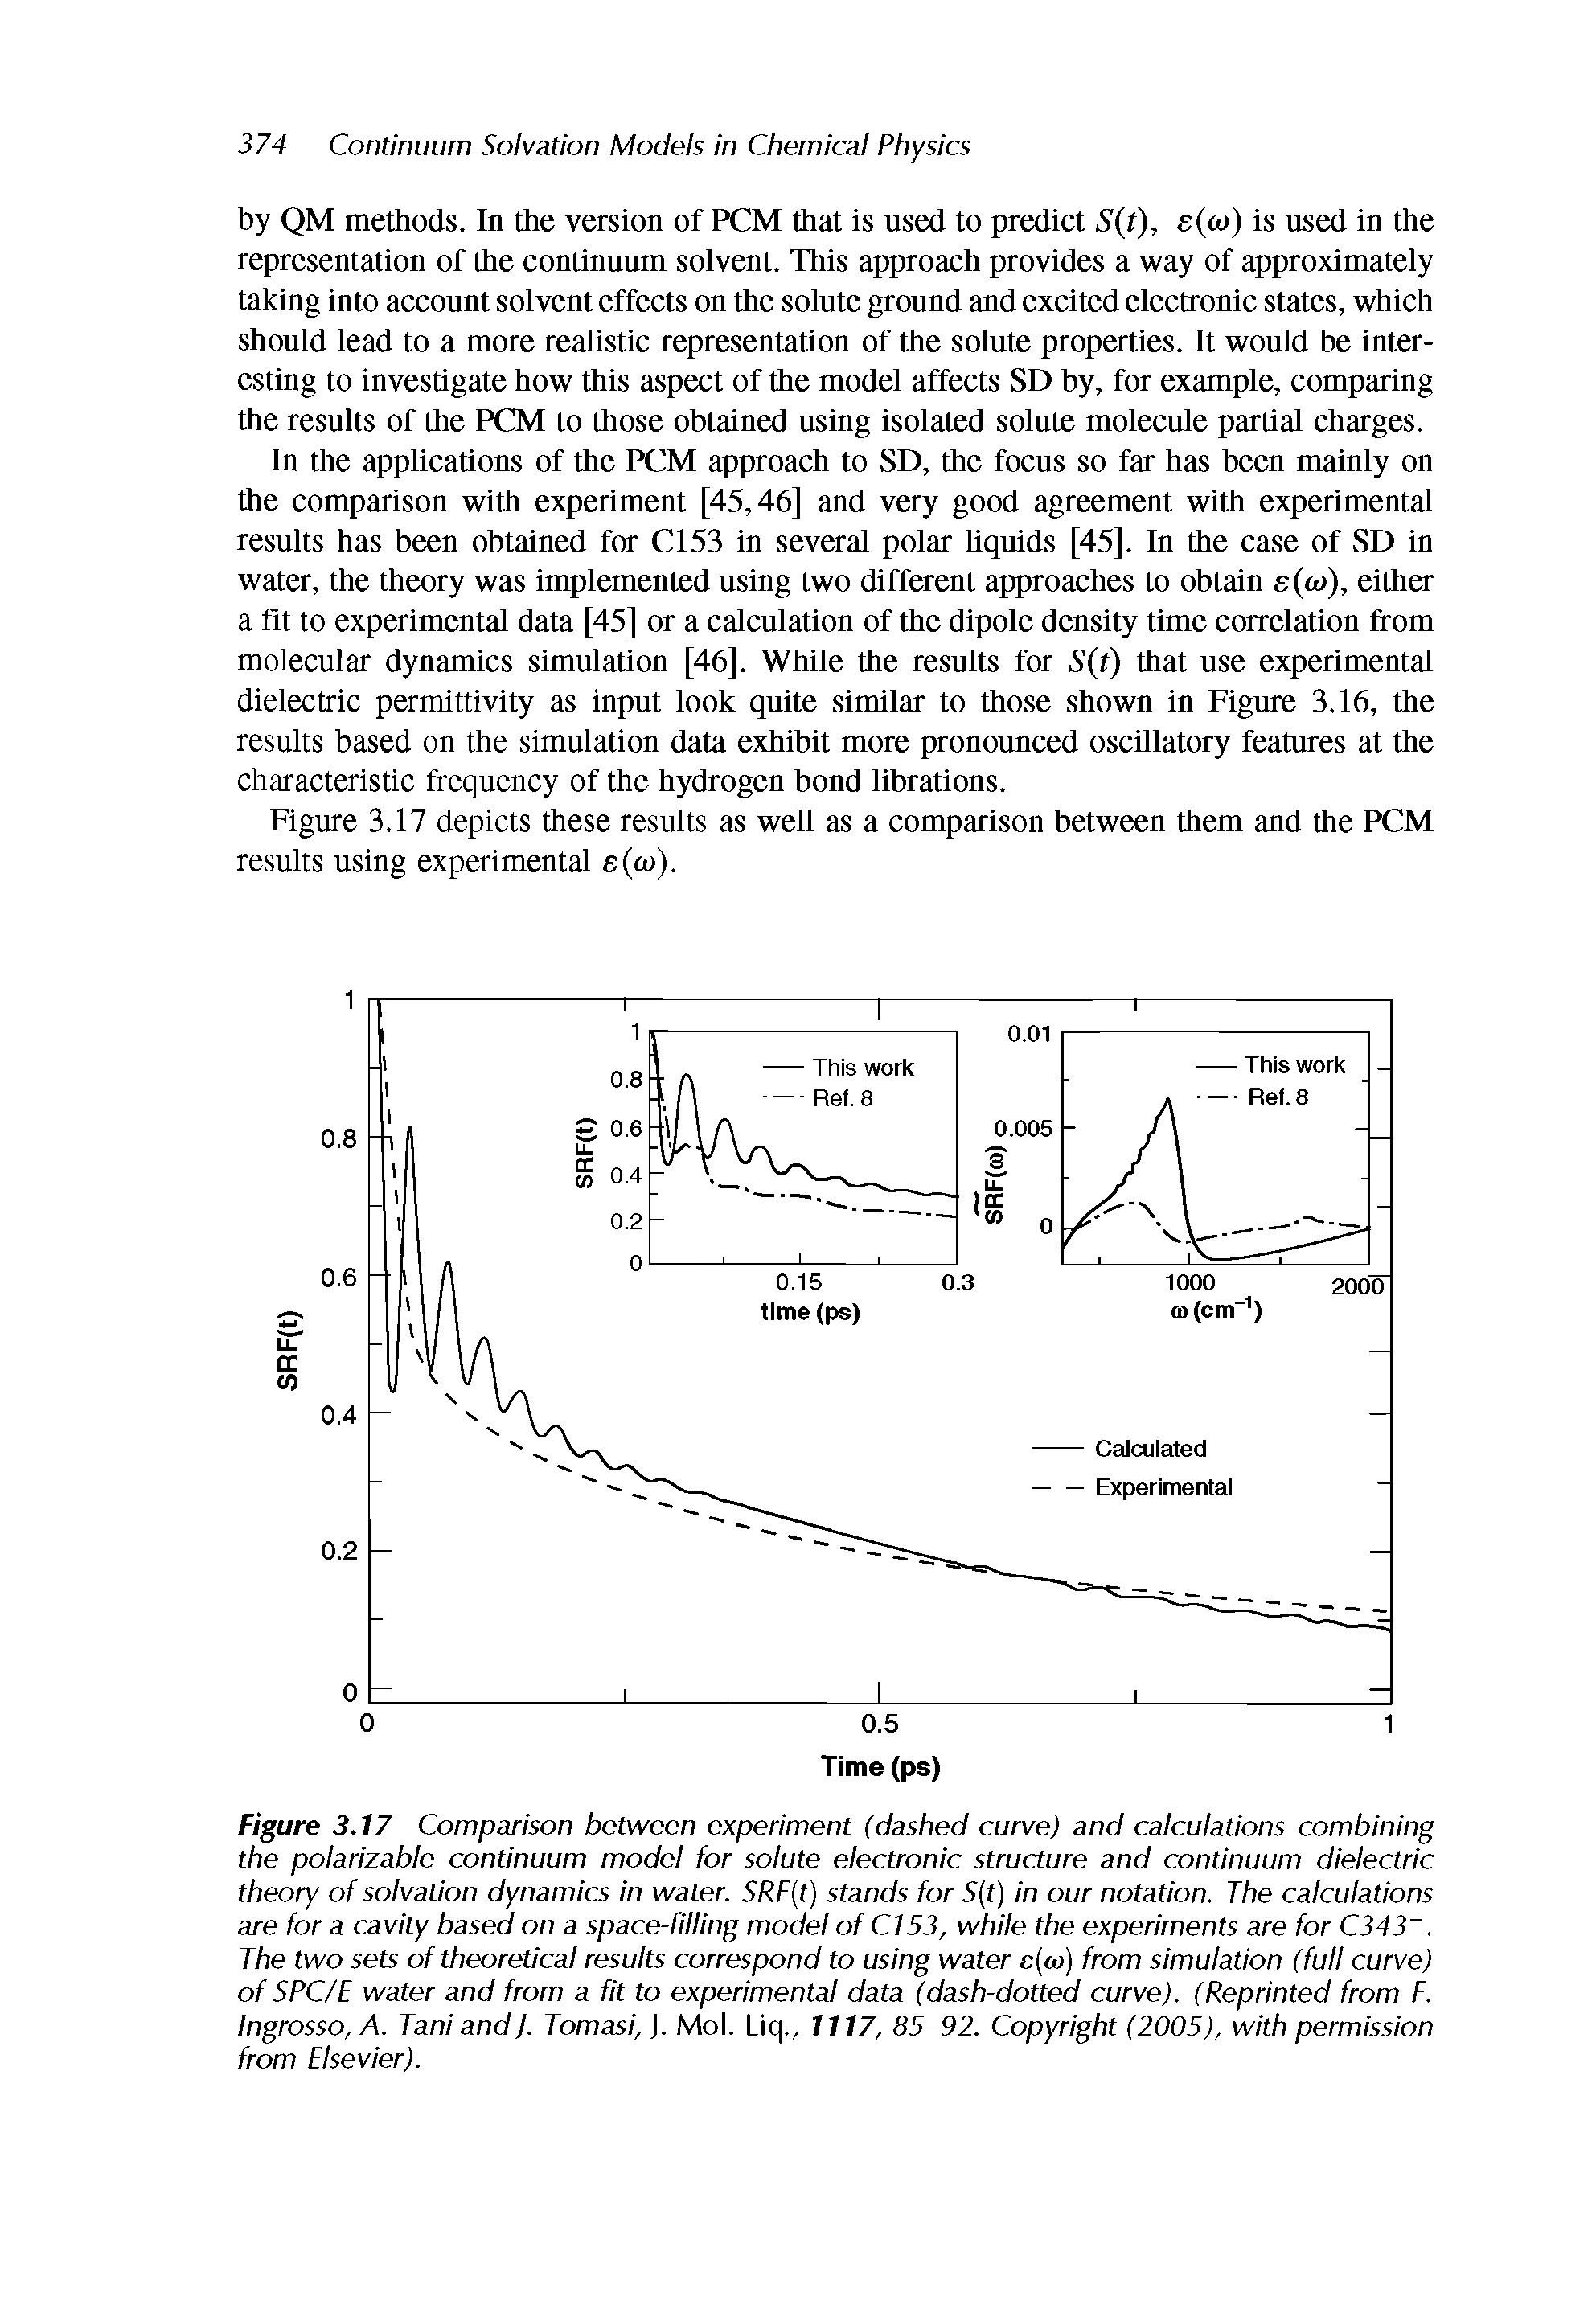 Figure 3.17 Comparison between experiment (dashed curve) and calculations combining the polarizable continuum model for solute electronic structure and continuum dielectric theory of solvation dynamics in water. SRF(t) stands for S(t) in our notation. The calculations are for a cavity based on a space-filling model of Cl53, while the experiments are for C343. The two sets of theoretical results correspond to using water e(o>) from simulation (full curve) of SPC/E water and from a fit to experimental data (dash-dotted curve). (Reprinted from F. Ingrosso, A. Tani andJ. Tomasi, J. Mol. Liq., 1117, 85-92. Copyright (2005), with permission from Elsevier).